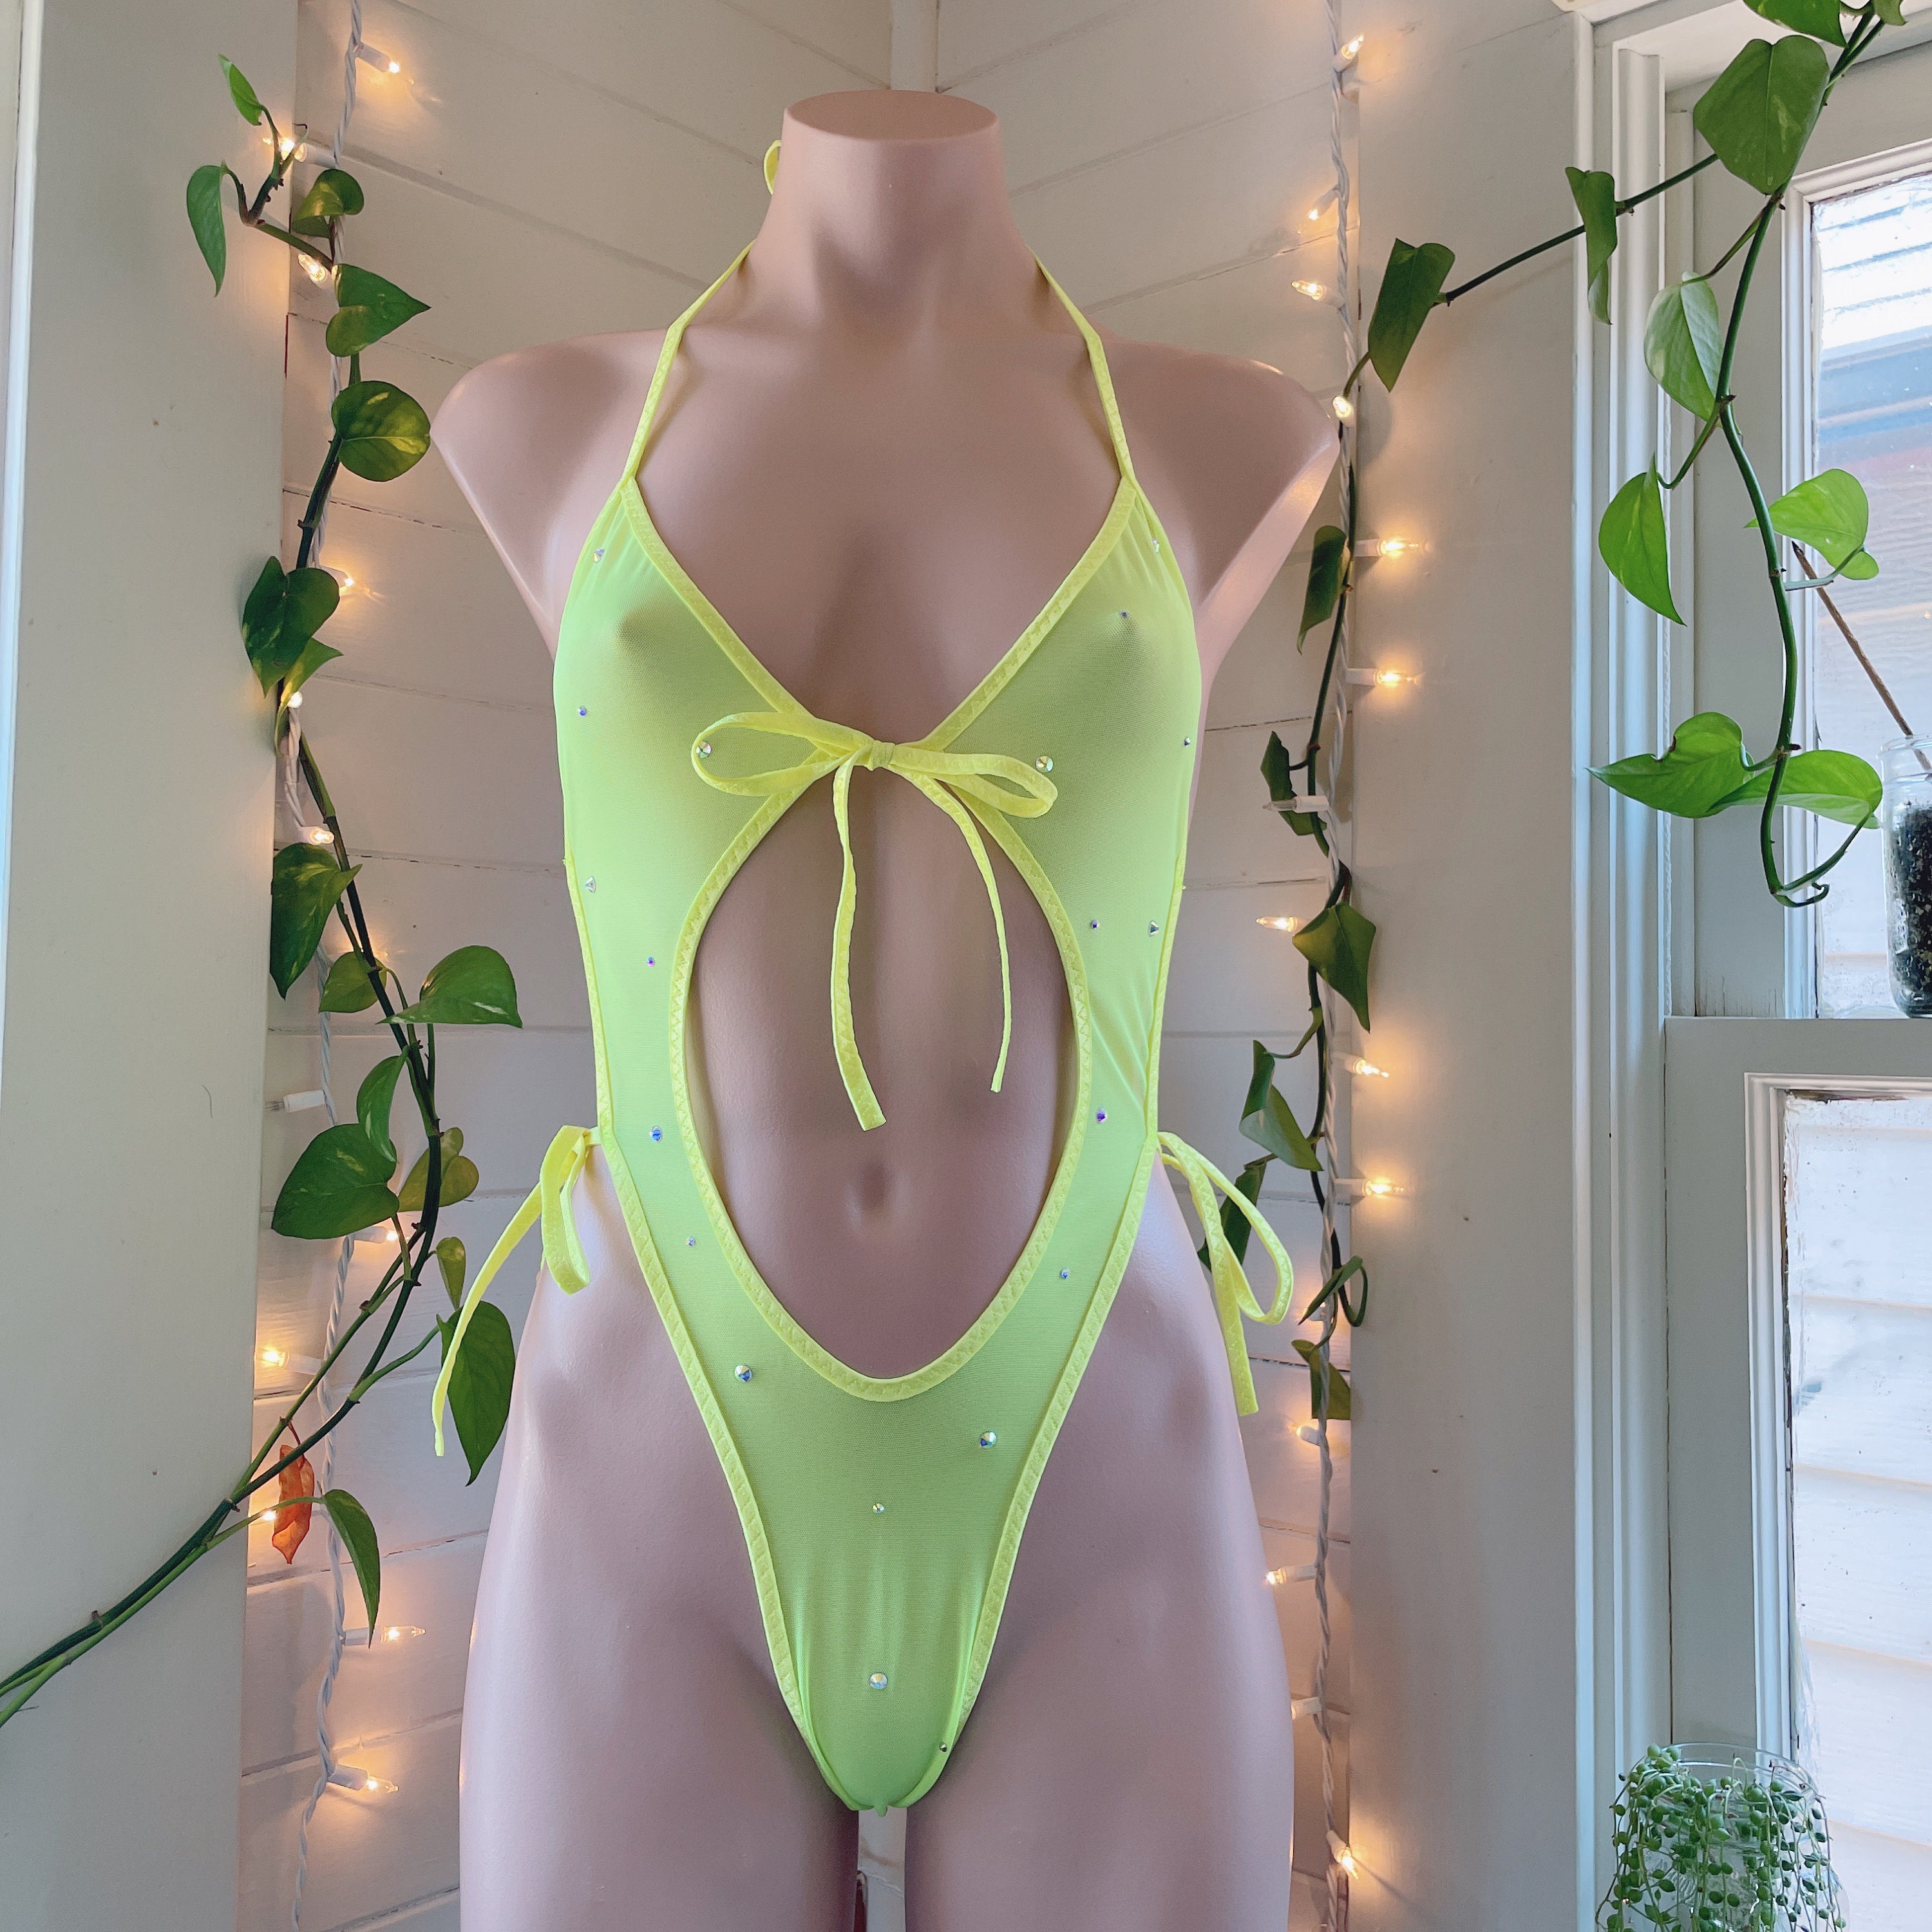 New Stripper Outfit/ Metallic lime green